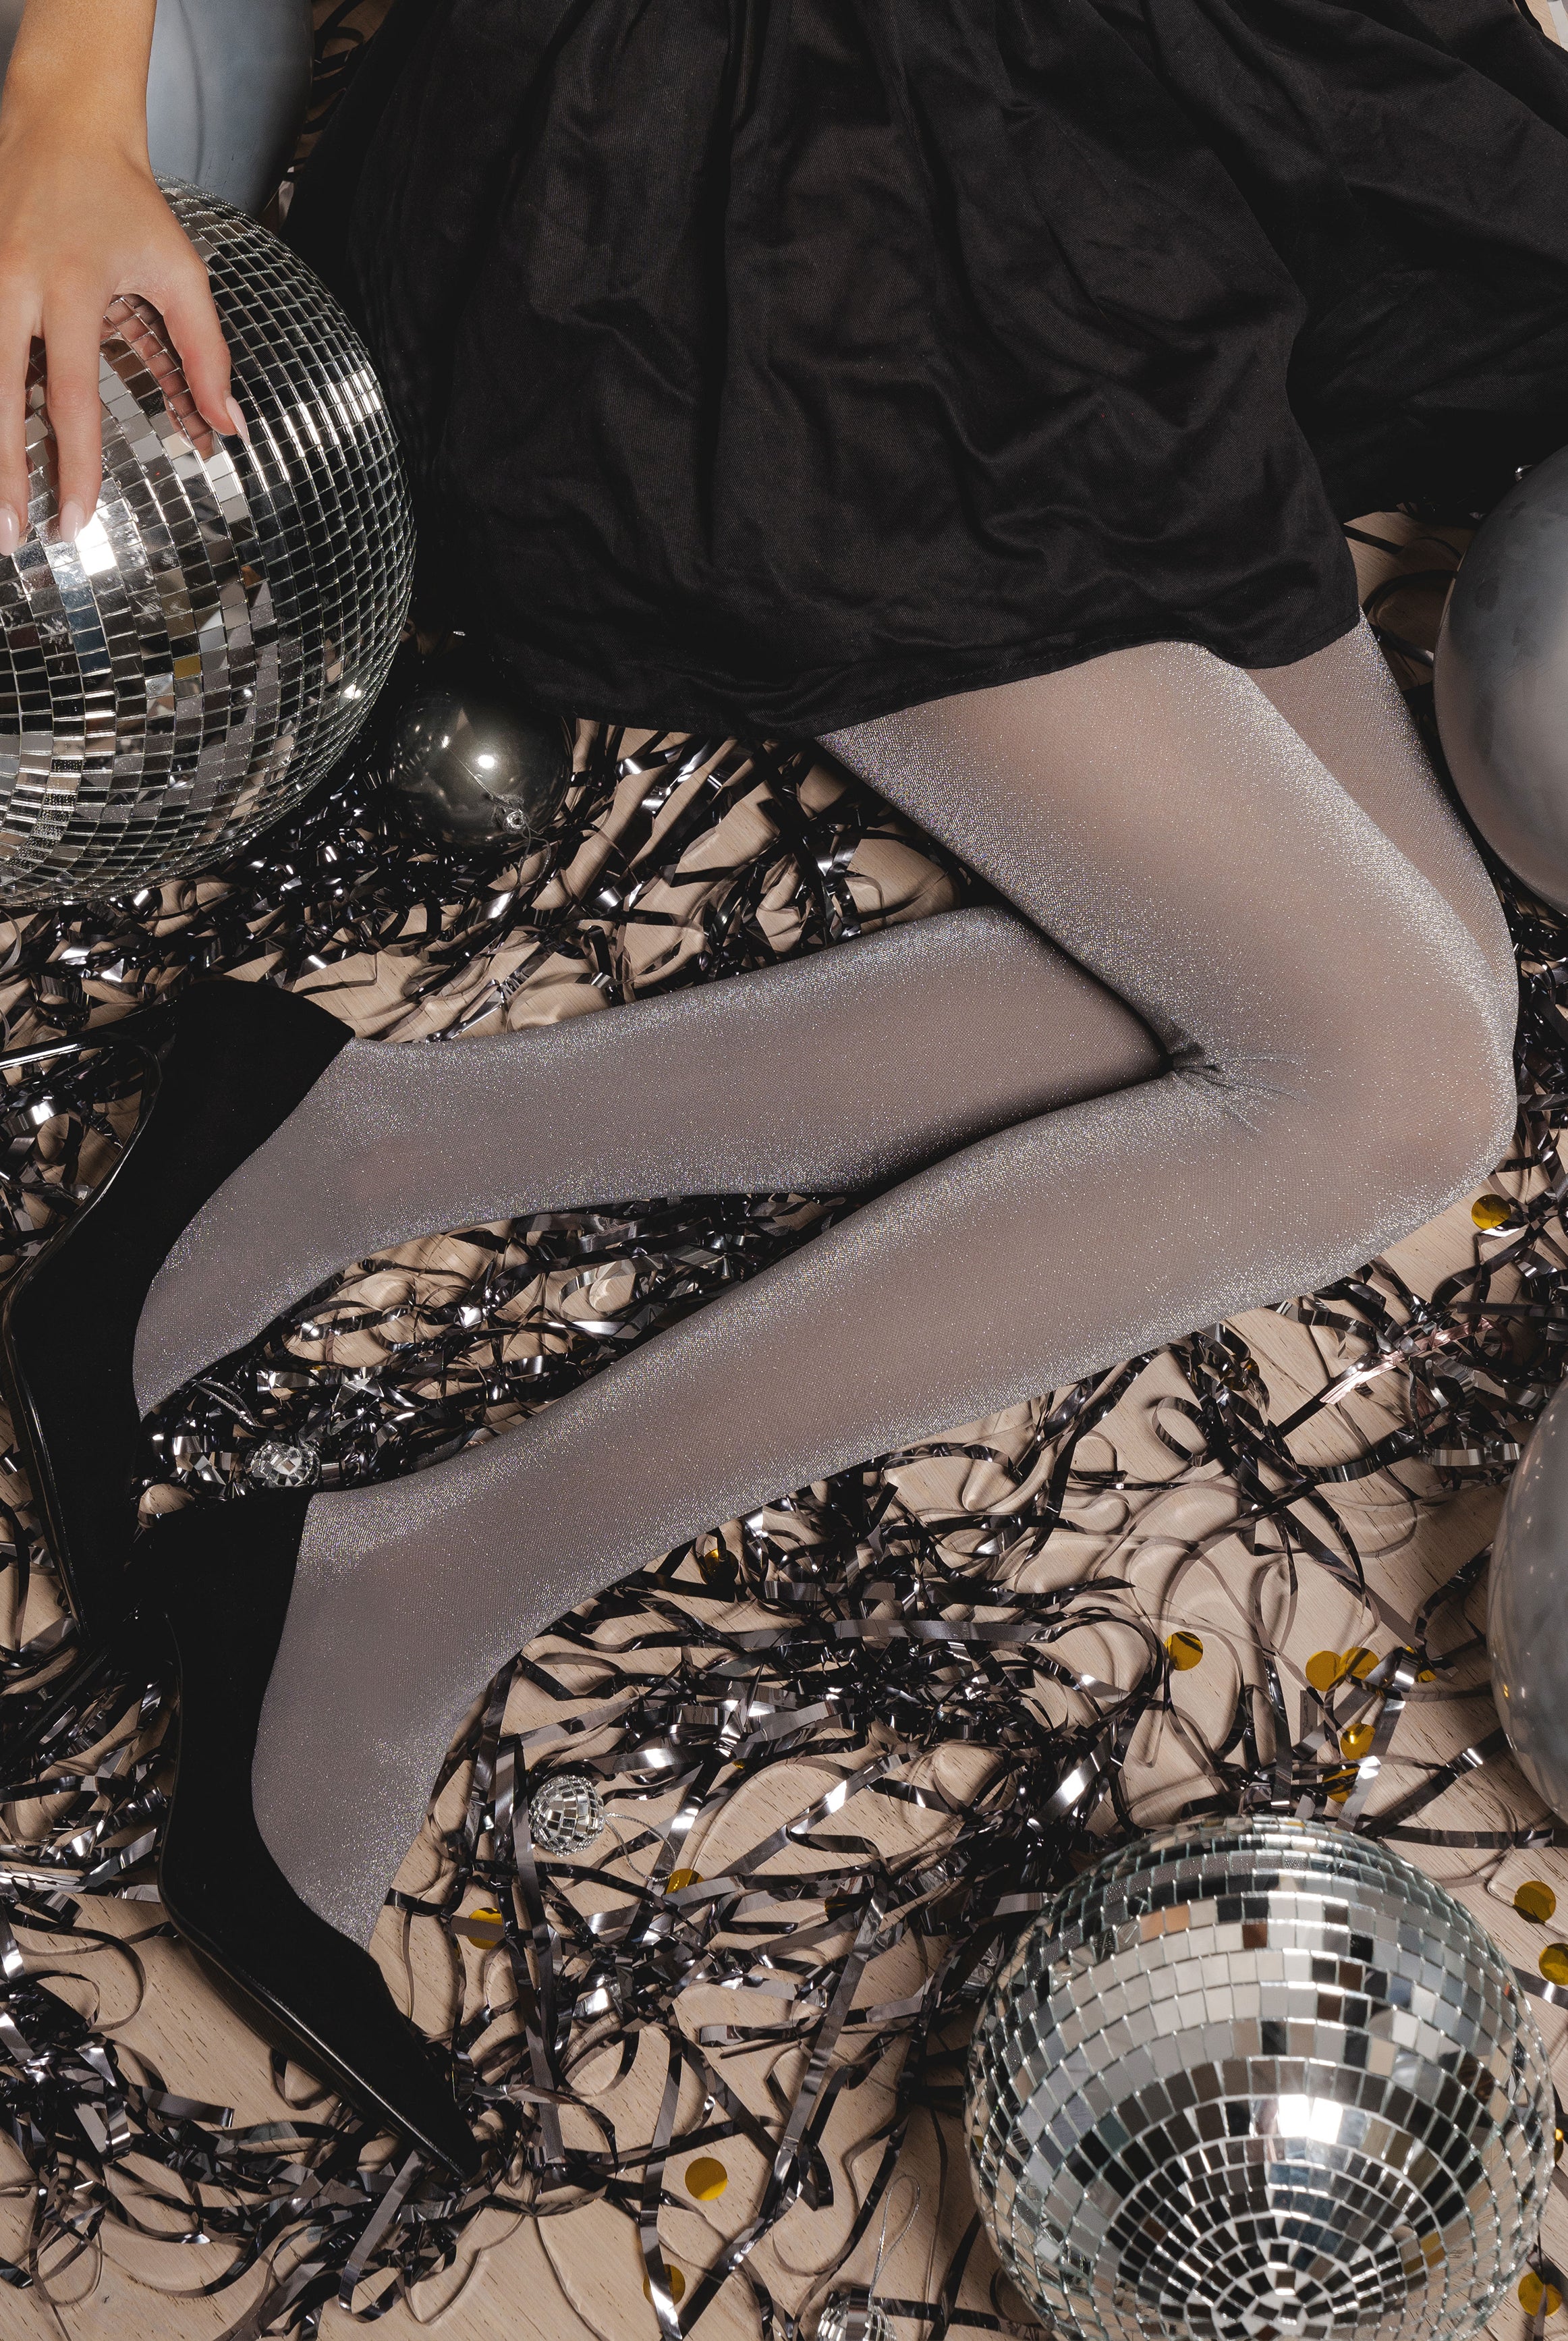 Sheer Metallic Tights in silver | Hosiery | Tights | Party | Christmas | new years | Glam | Going Out | Halloween | Costume | Glitter | Sparkly | Accessories | Women's Accessories | Accessory | Autumn | Winter | Fall | Streetwear | style